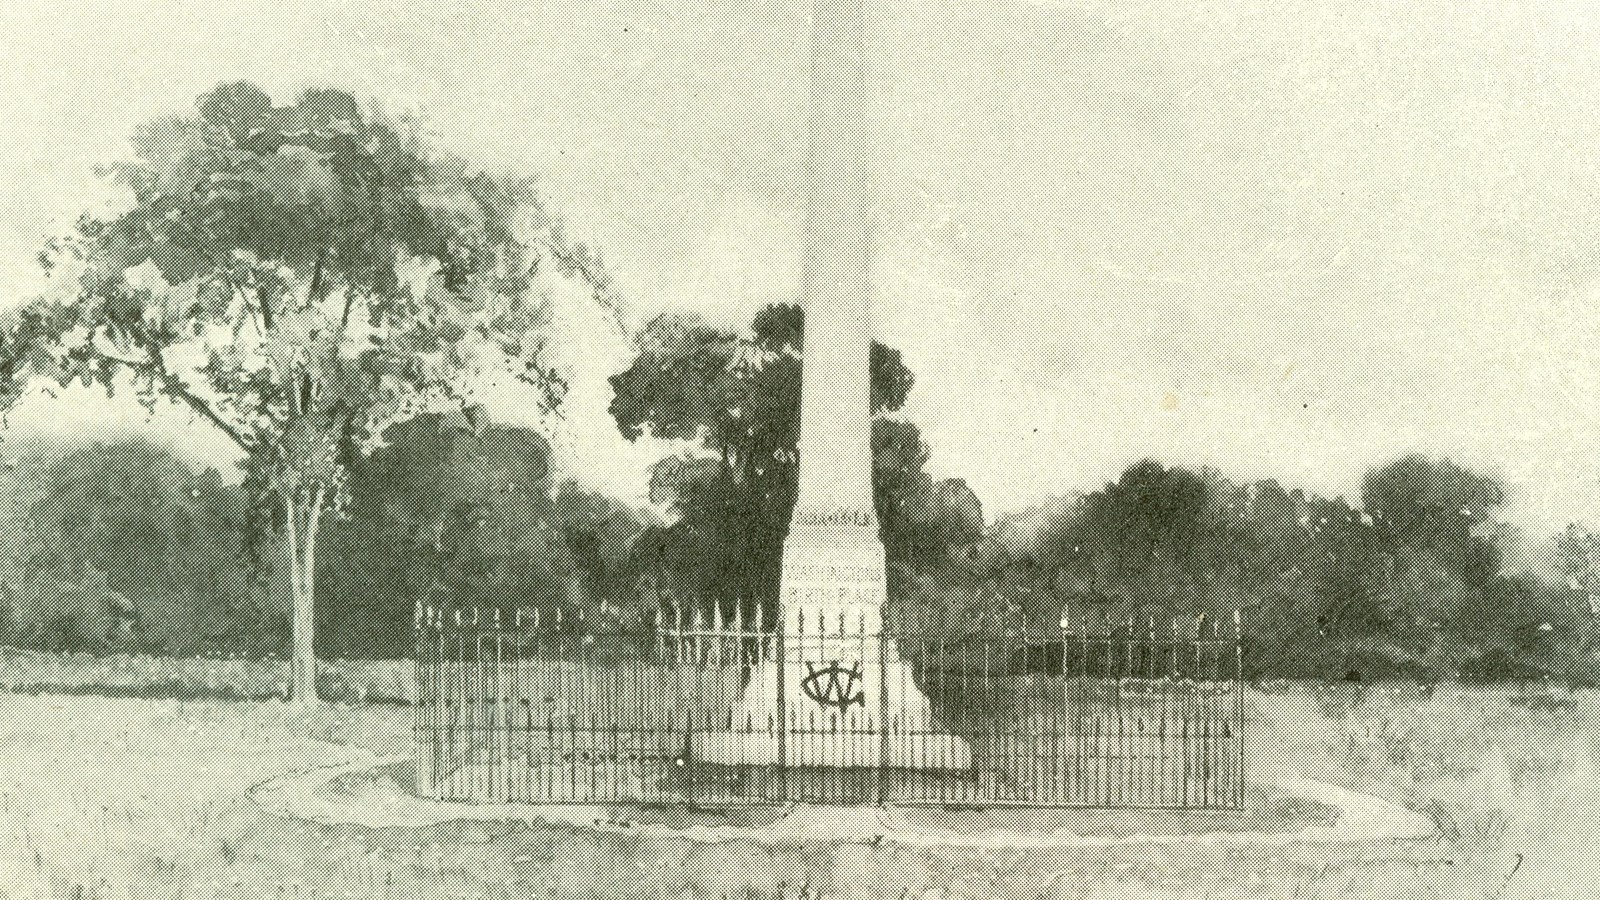 The Birthplace Monument